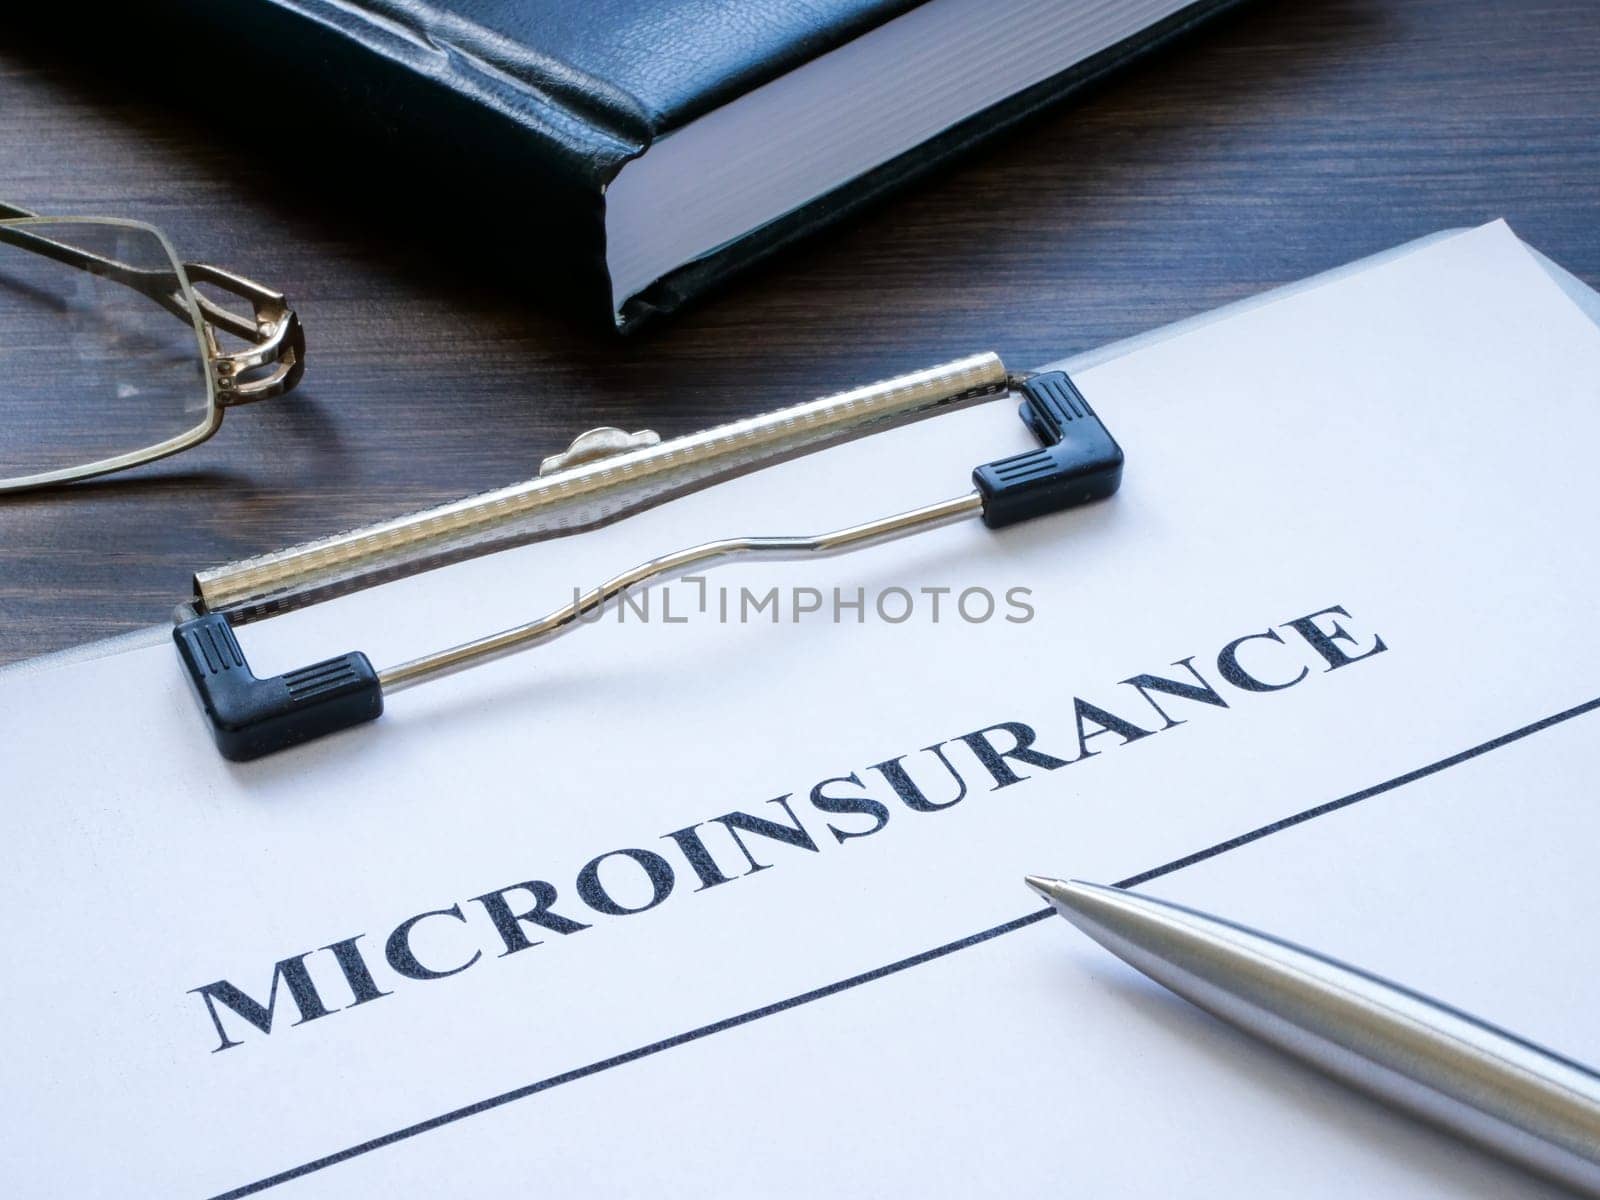 Clipboard with microinsurance application and notepad.